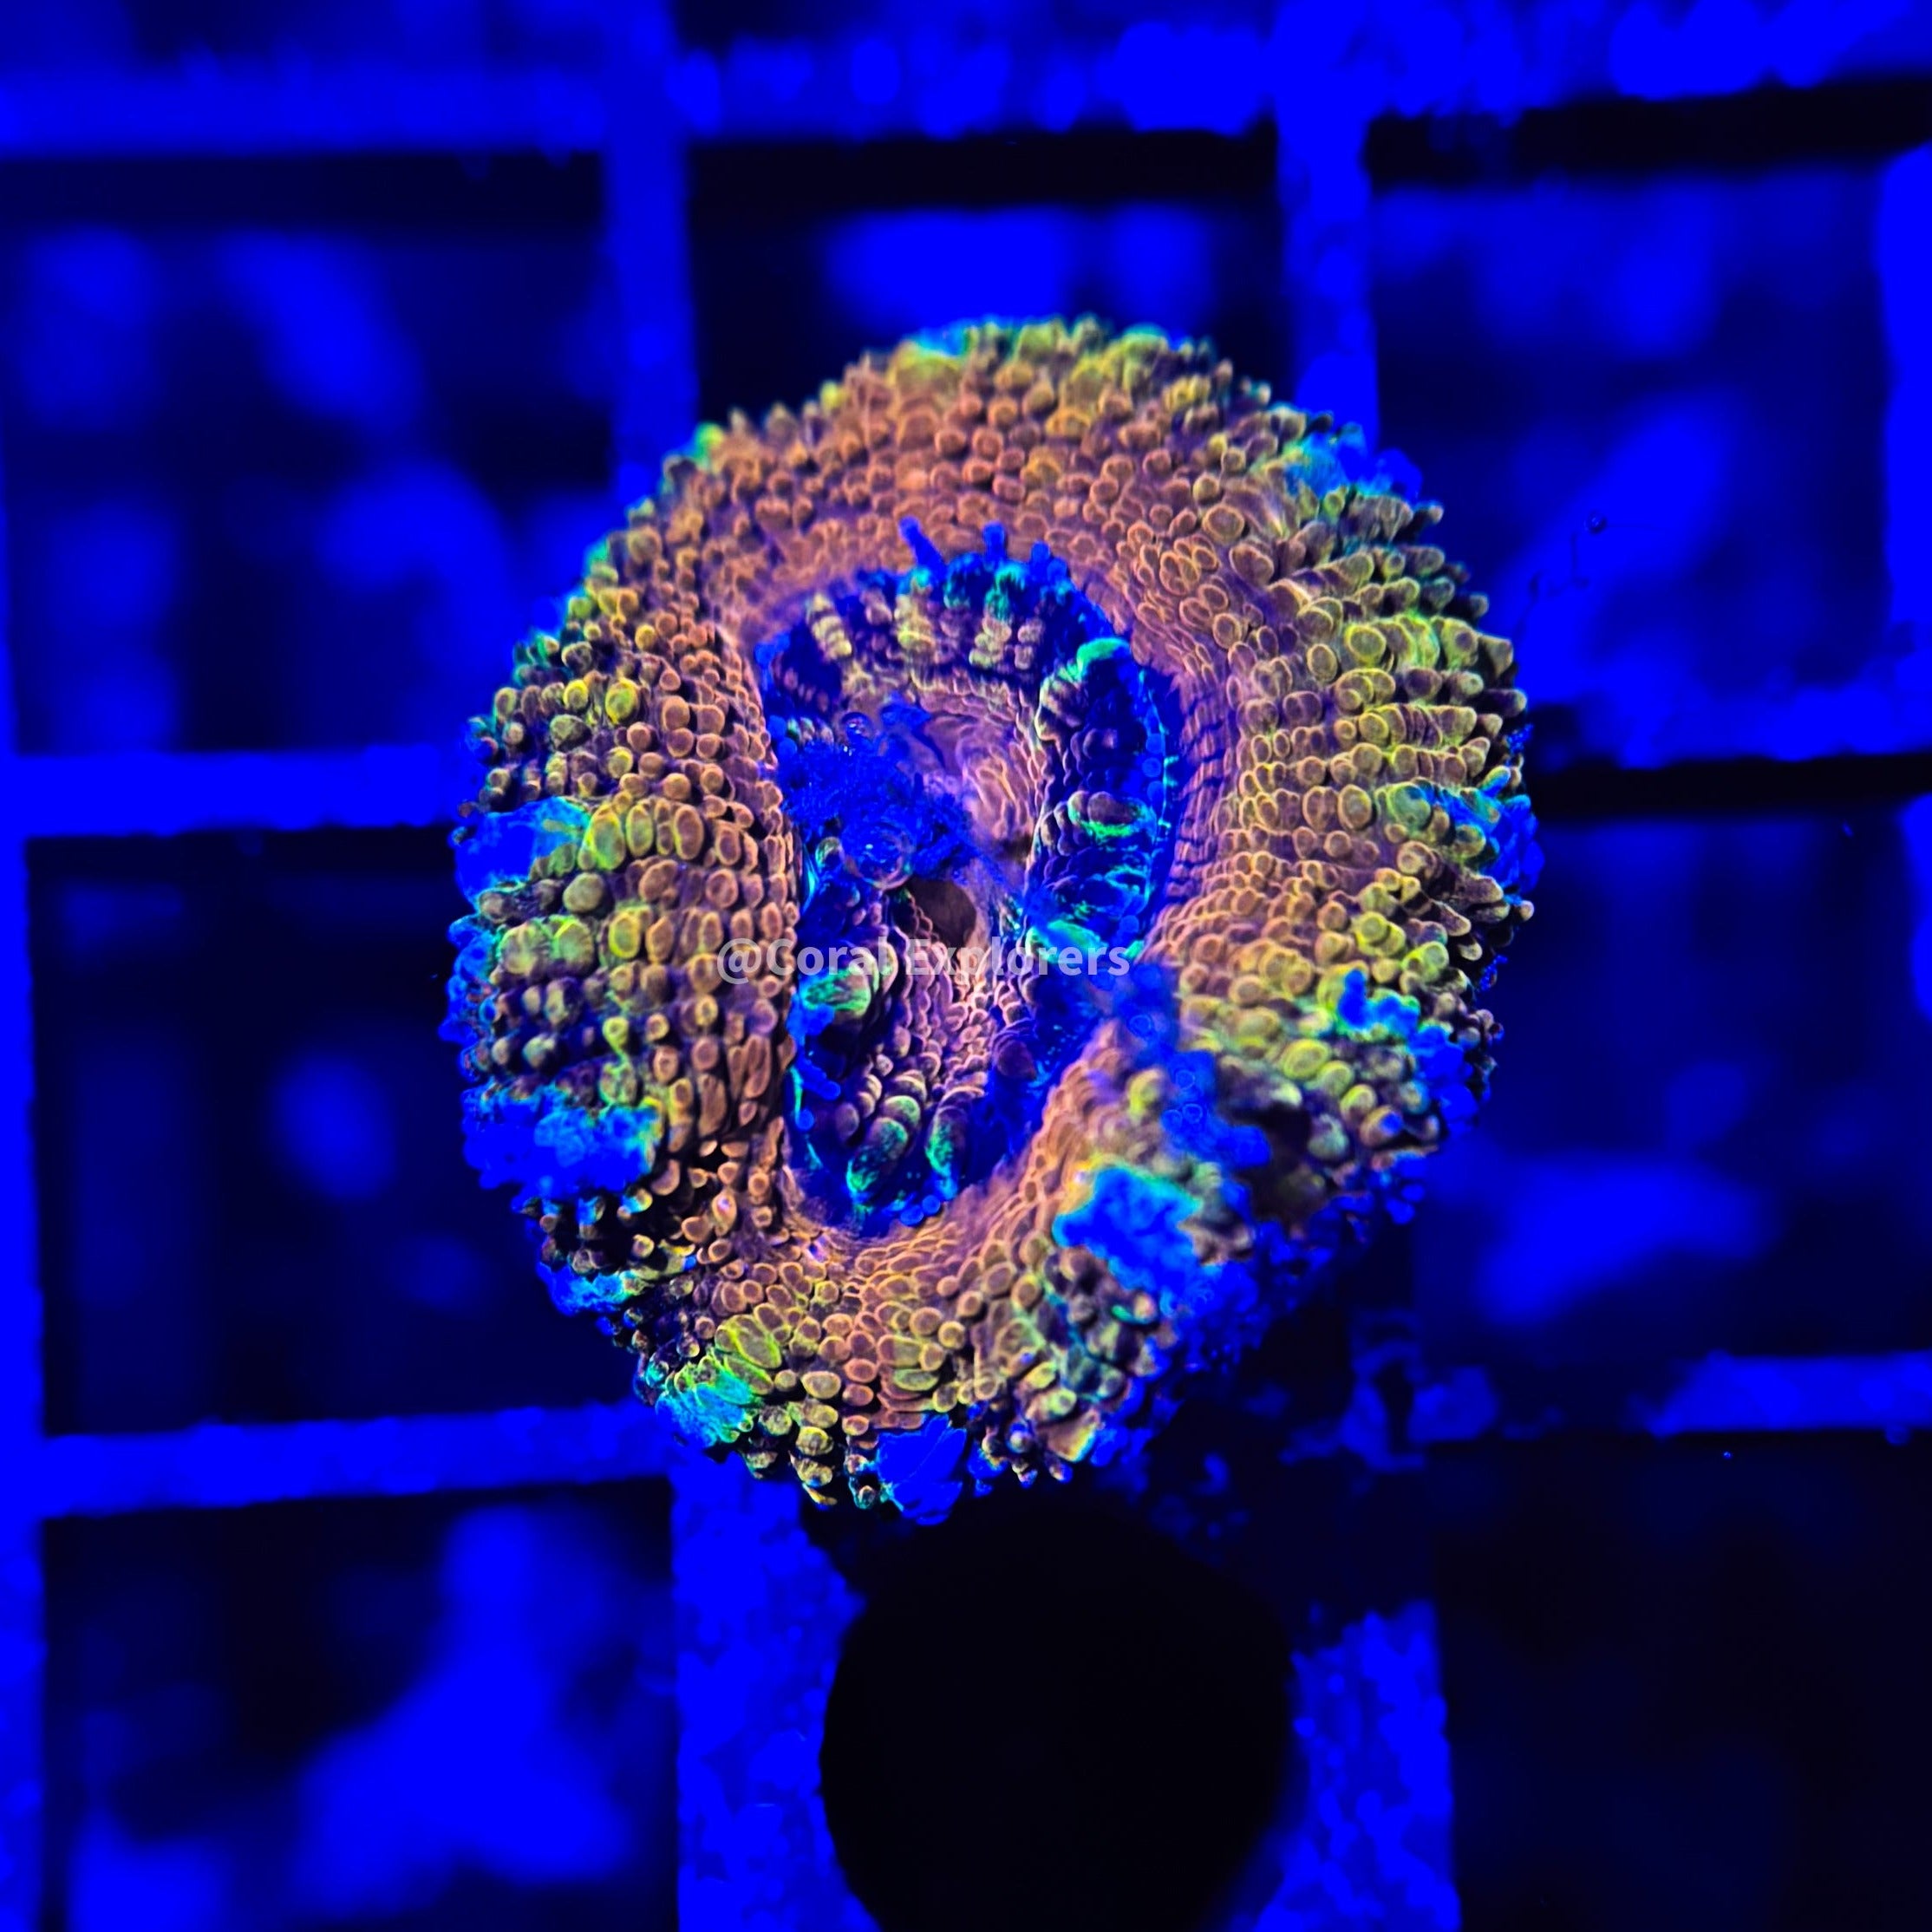 CE- WYSIWYG Gold Mine Acan Lord Micromussa Coral Frag LPS SPS #R1OC8